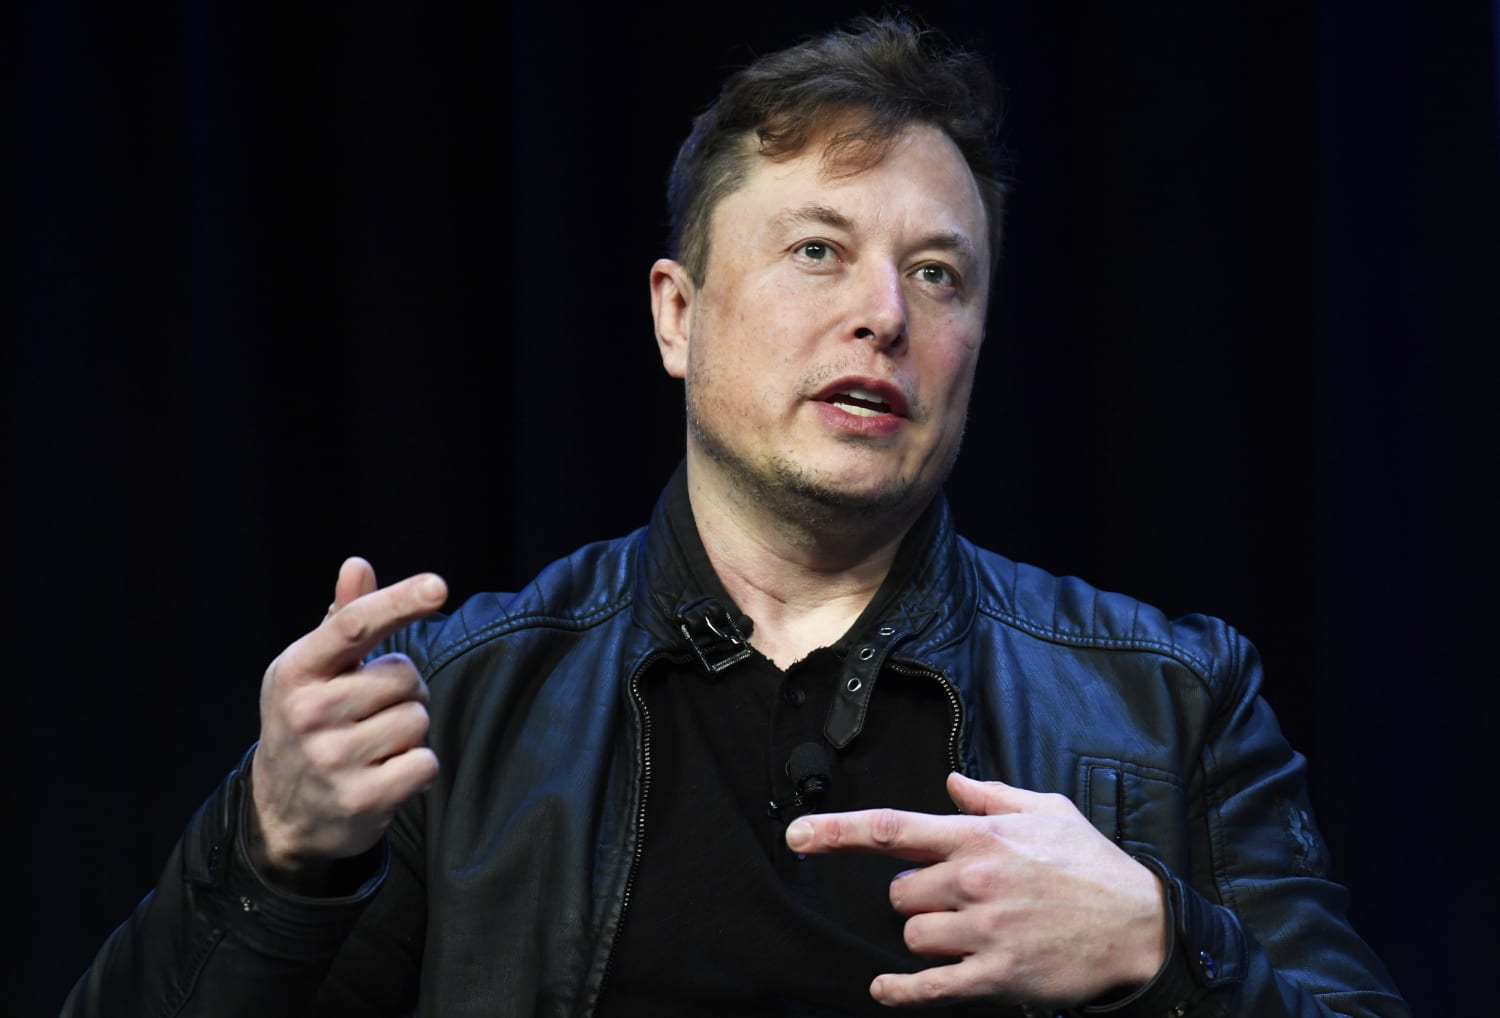 Elon-Musk-alleges-fraud-in-countersuit.-Twitter-says-he-was-not-'hoodwinked'-into-merger.